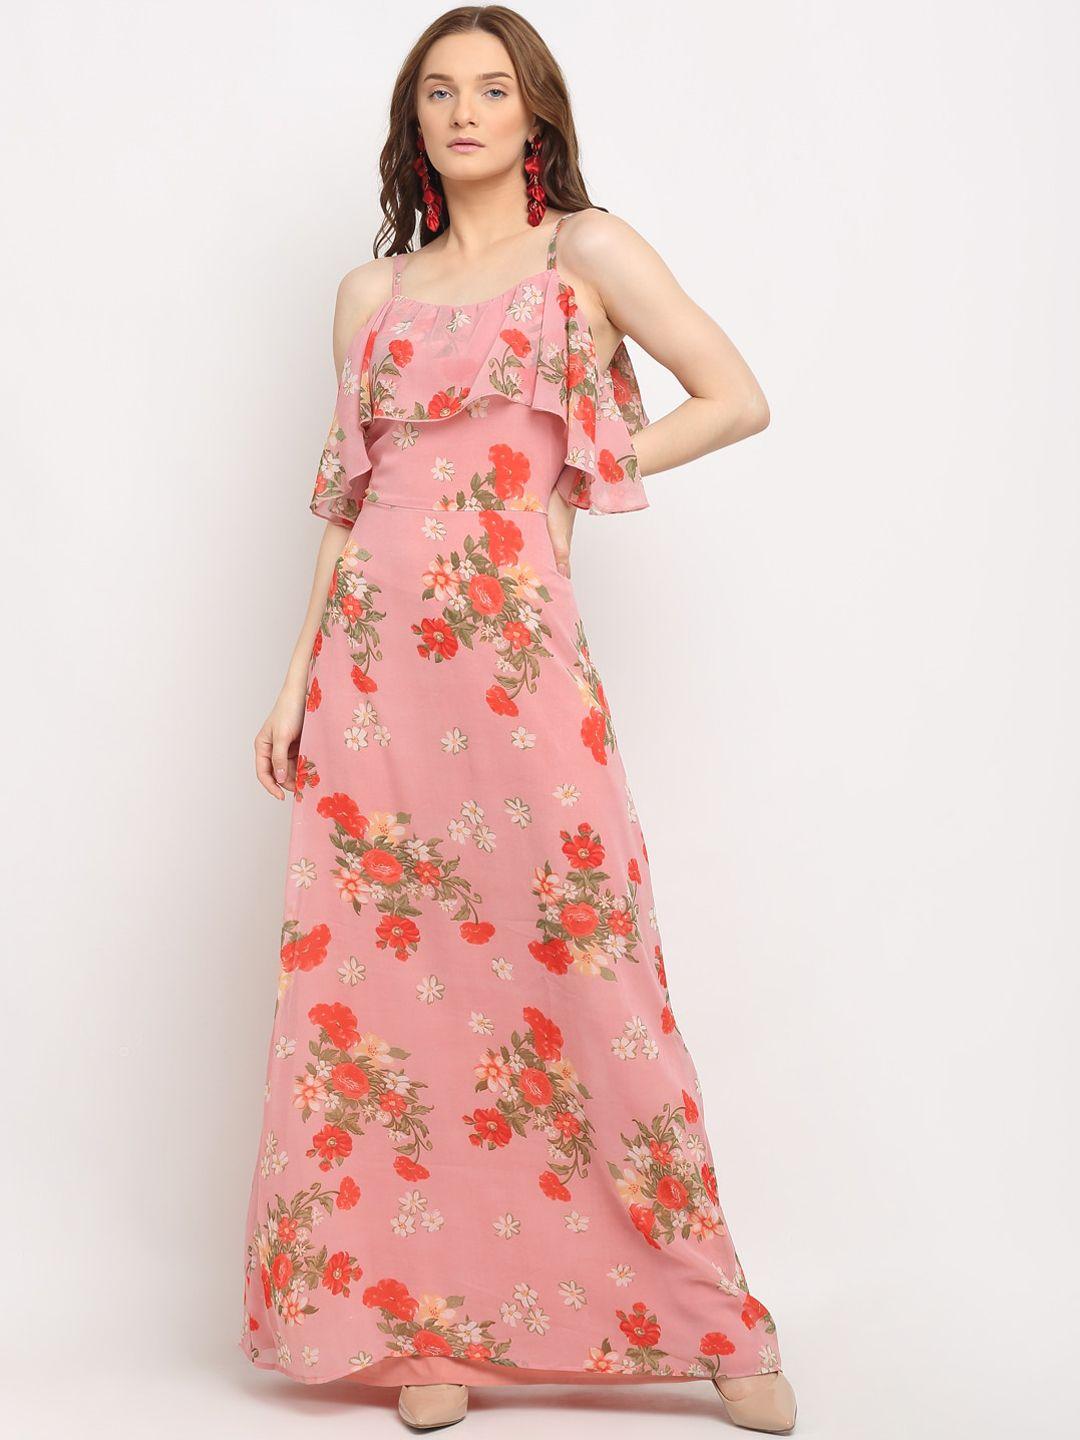 la zoire pink & red floral maxi dress with ruffled details